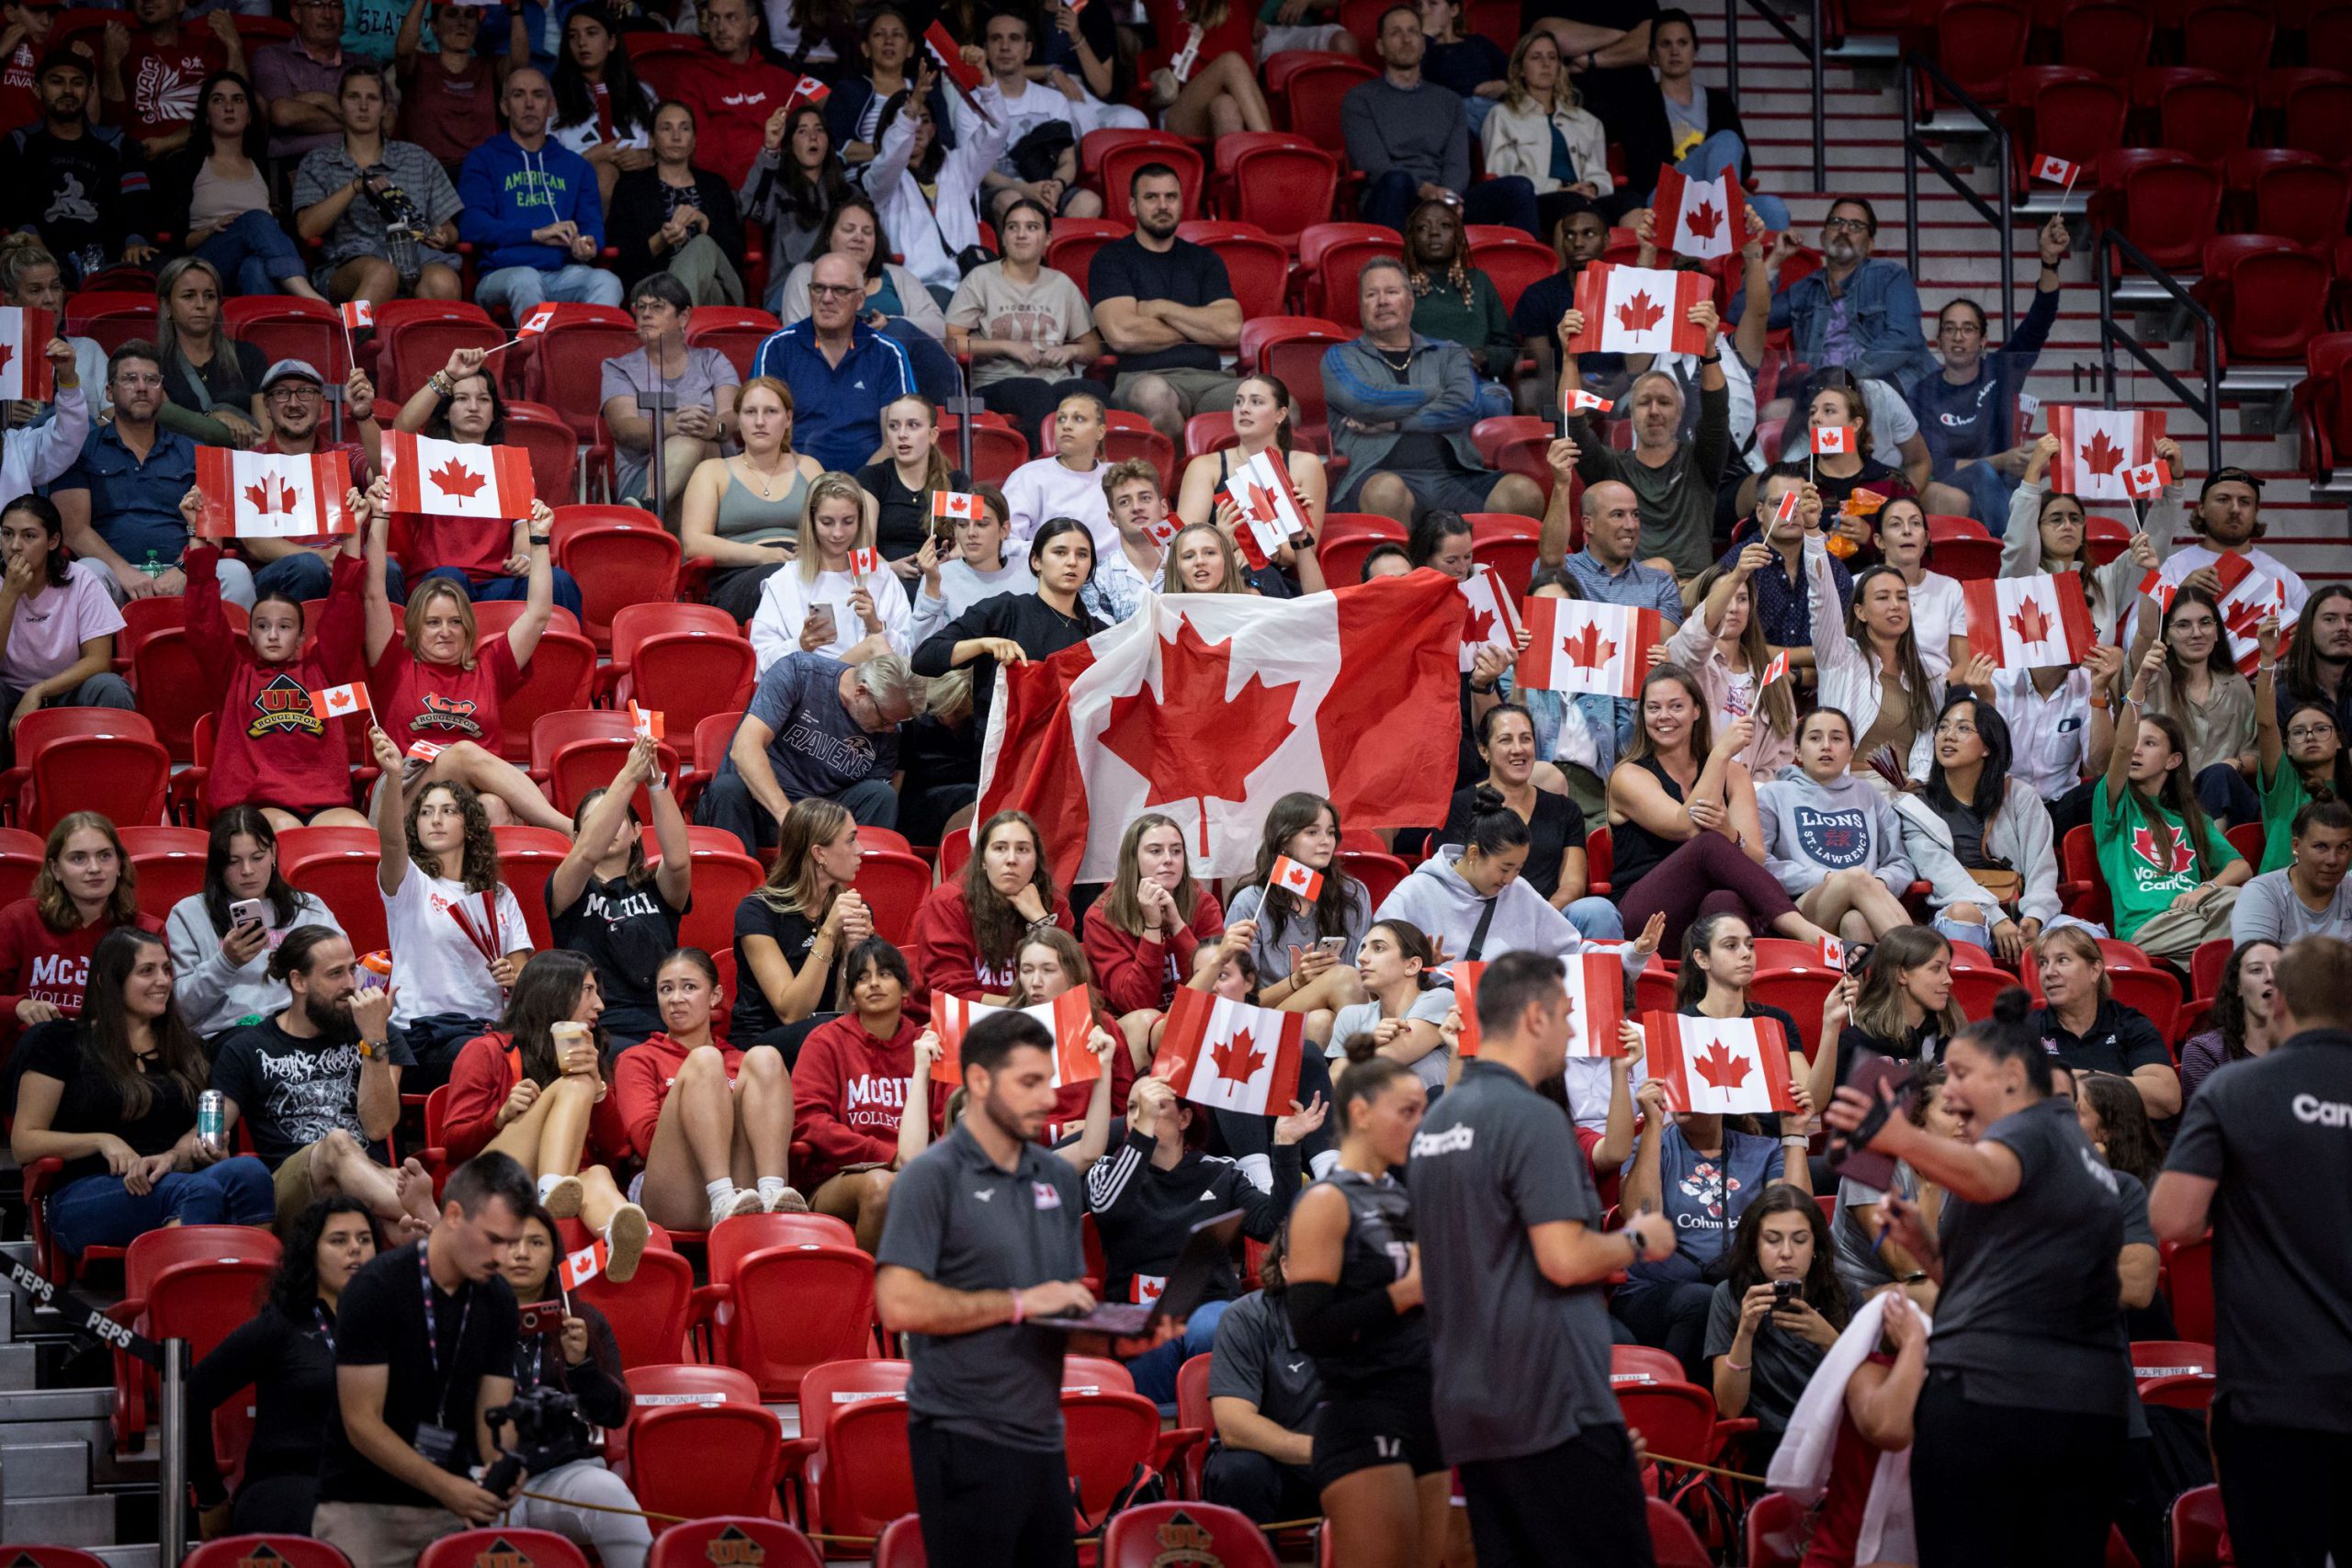 Canada impresses home crowd with opener win in Quebec